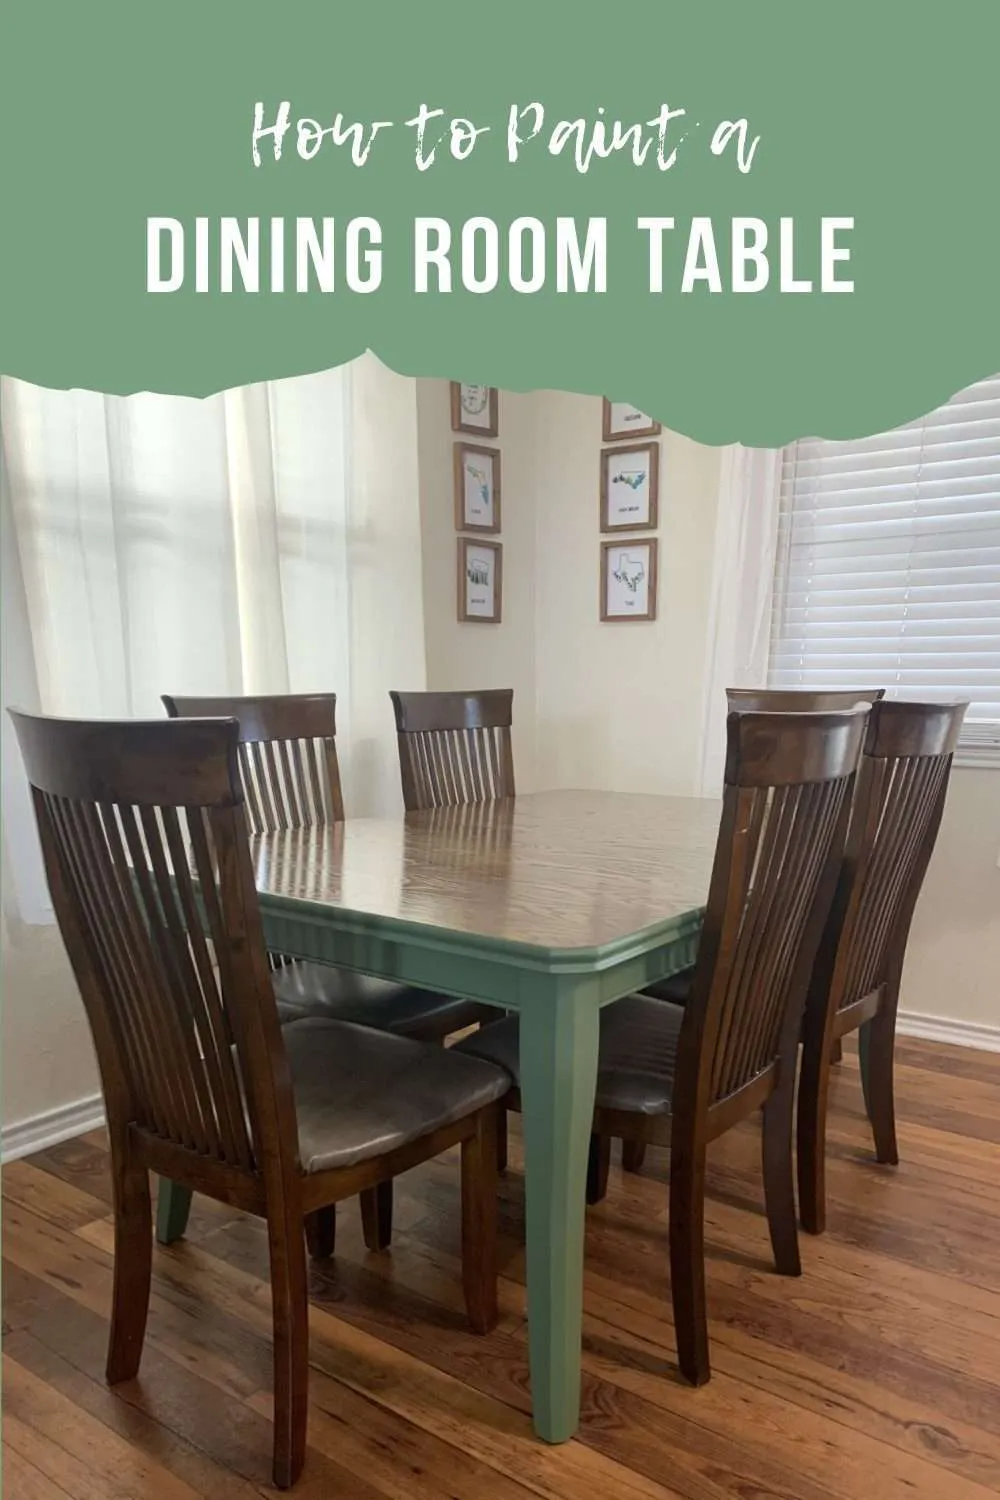 How to Paint a Dining Room Table | Finding Mandee